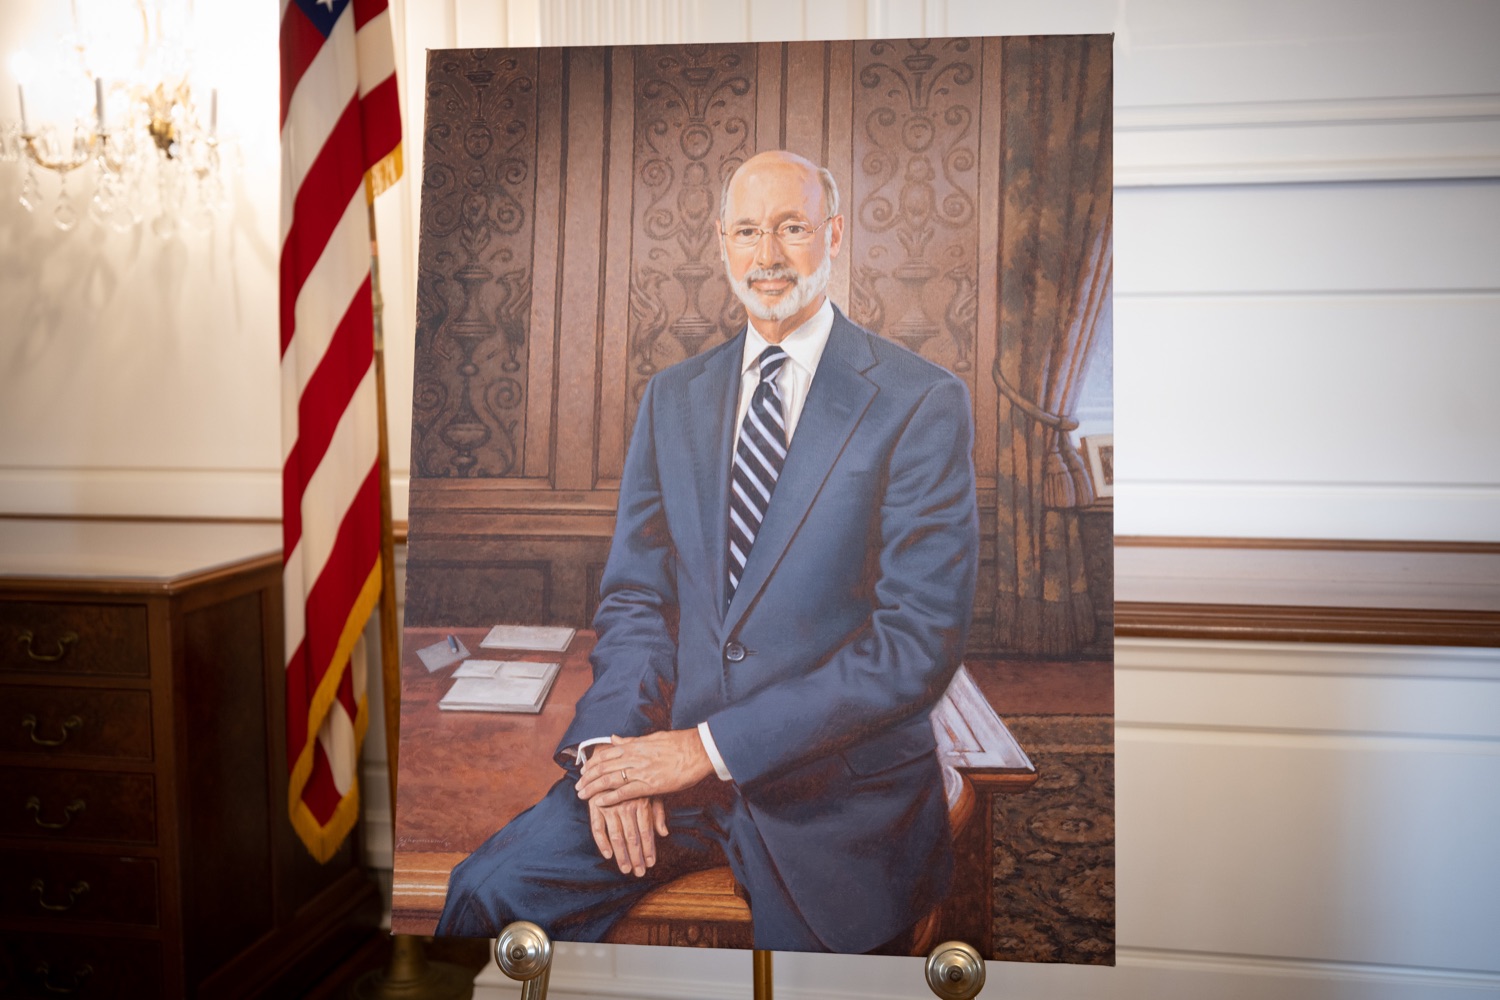 On January 10, 2023 at the Pennsylvania Governors Residence, Governor Wolf unveils his portrait that will hang in the Governors Office at the Pennsylvania State Capitol.  JANUARY 10, 2023 - HARRISBURG, PA<br><a href="https://filesource.amperwave.net/commonwealthofpa/photo/22524_gov_legacy_dz_008.JPG" target="_blank">⇣ Download Photo</a>